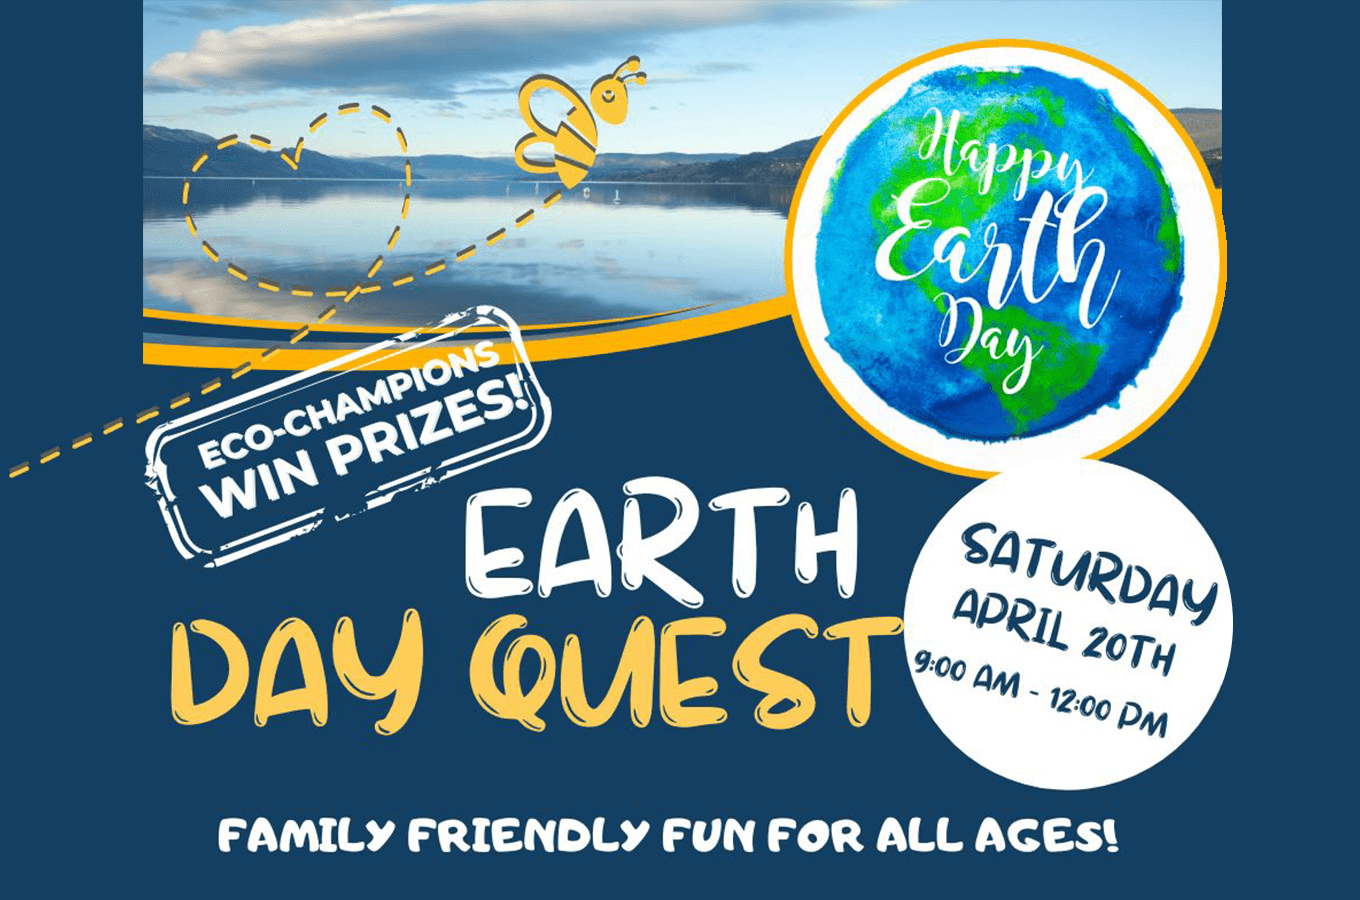 Earth Day Quest